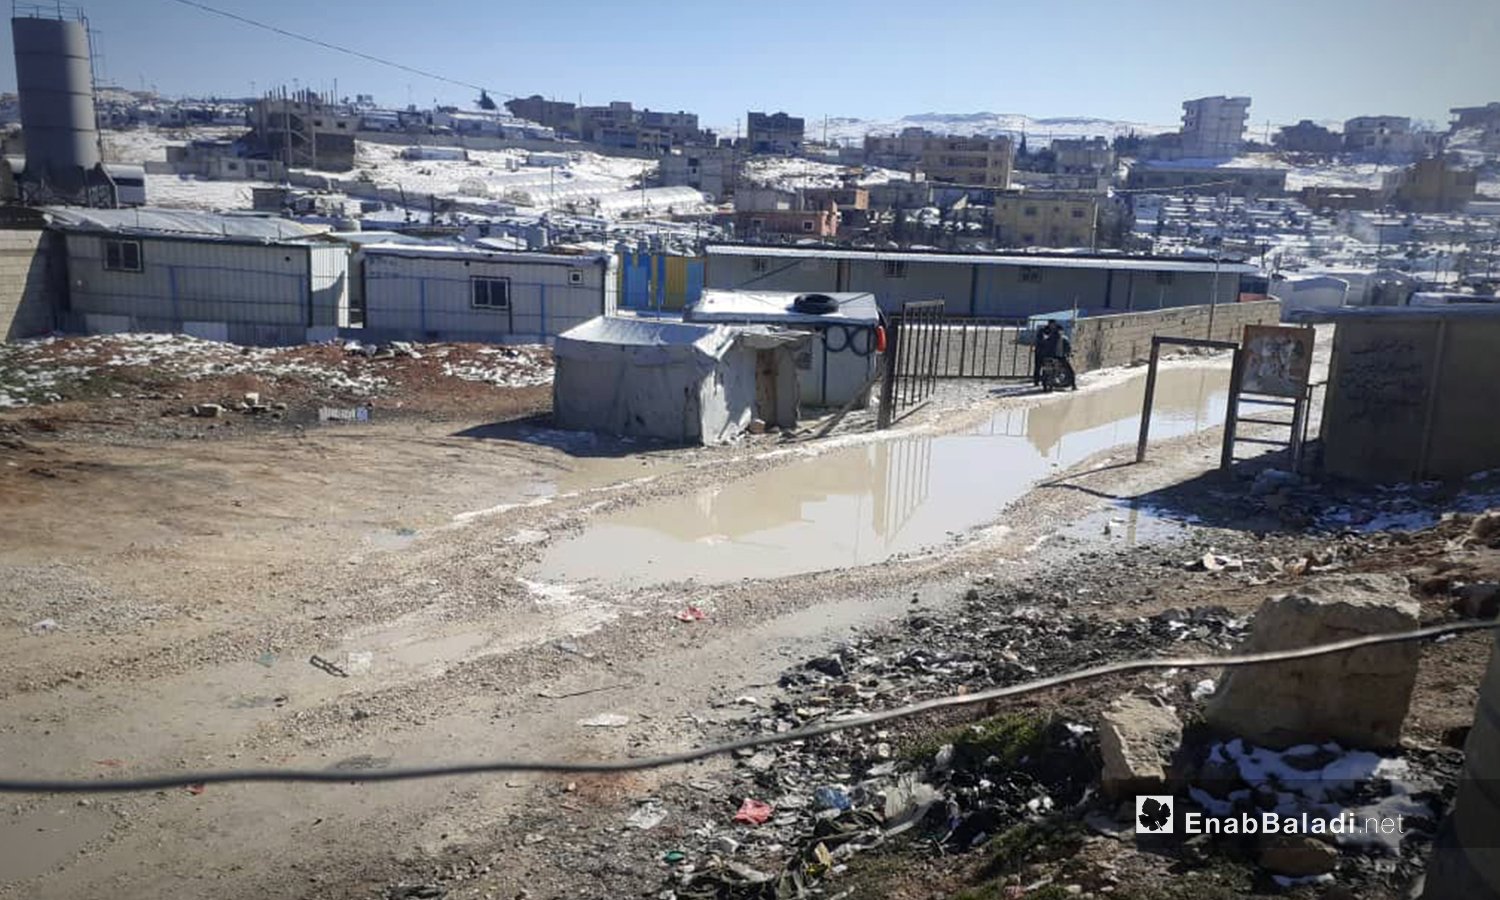 Syrian refugee camps in Arsal town in the far northeast of the Lebanese Beqaa governorate after the snowstorm that hit the town - 21 January 2021 (Enab Baladi)